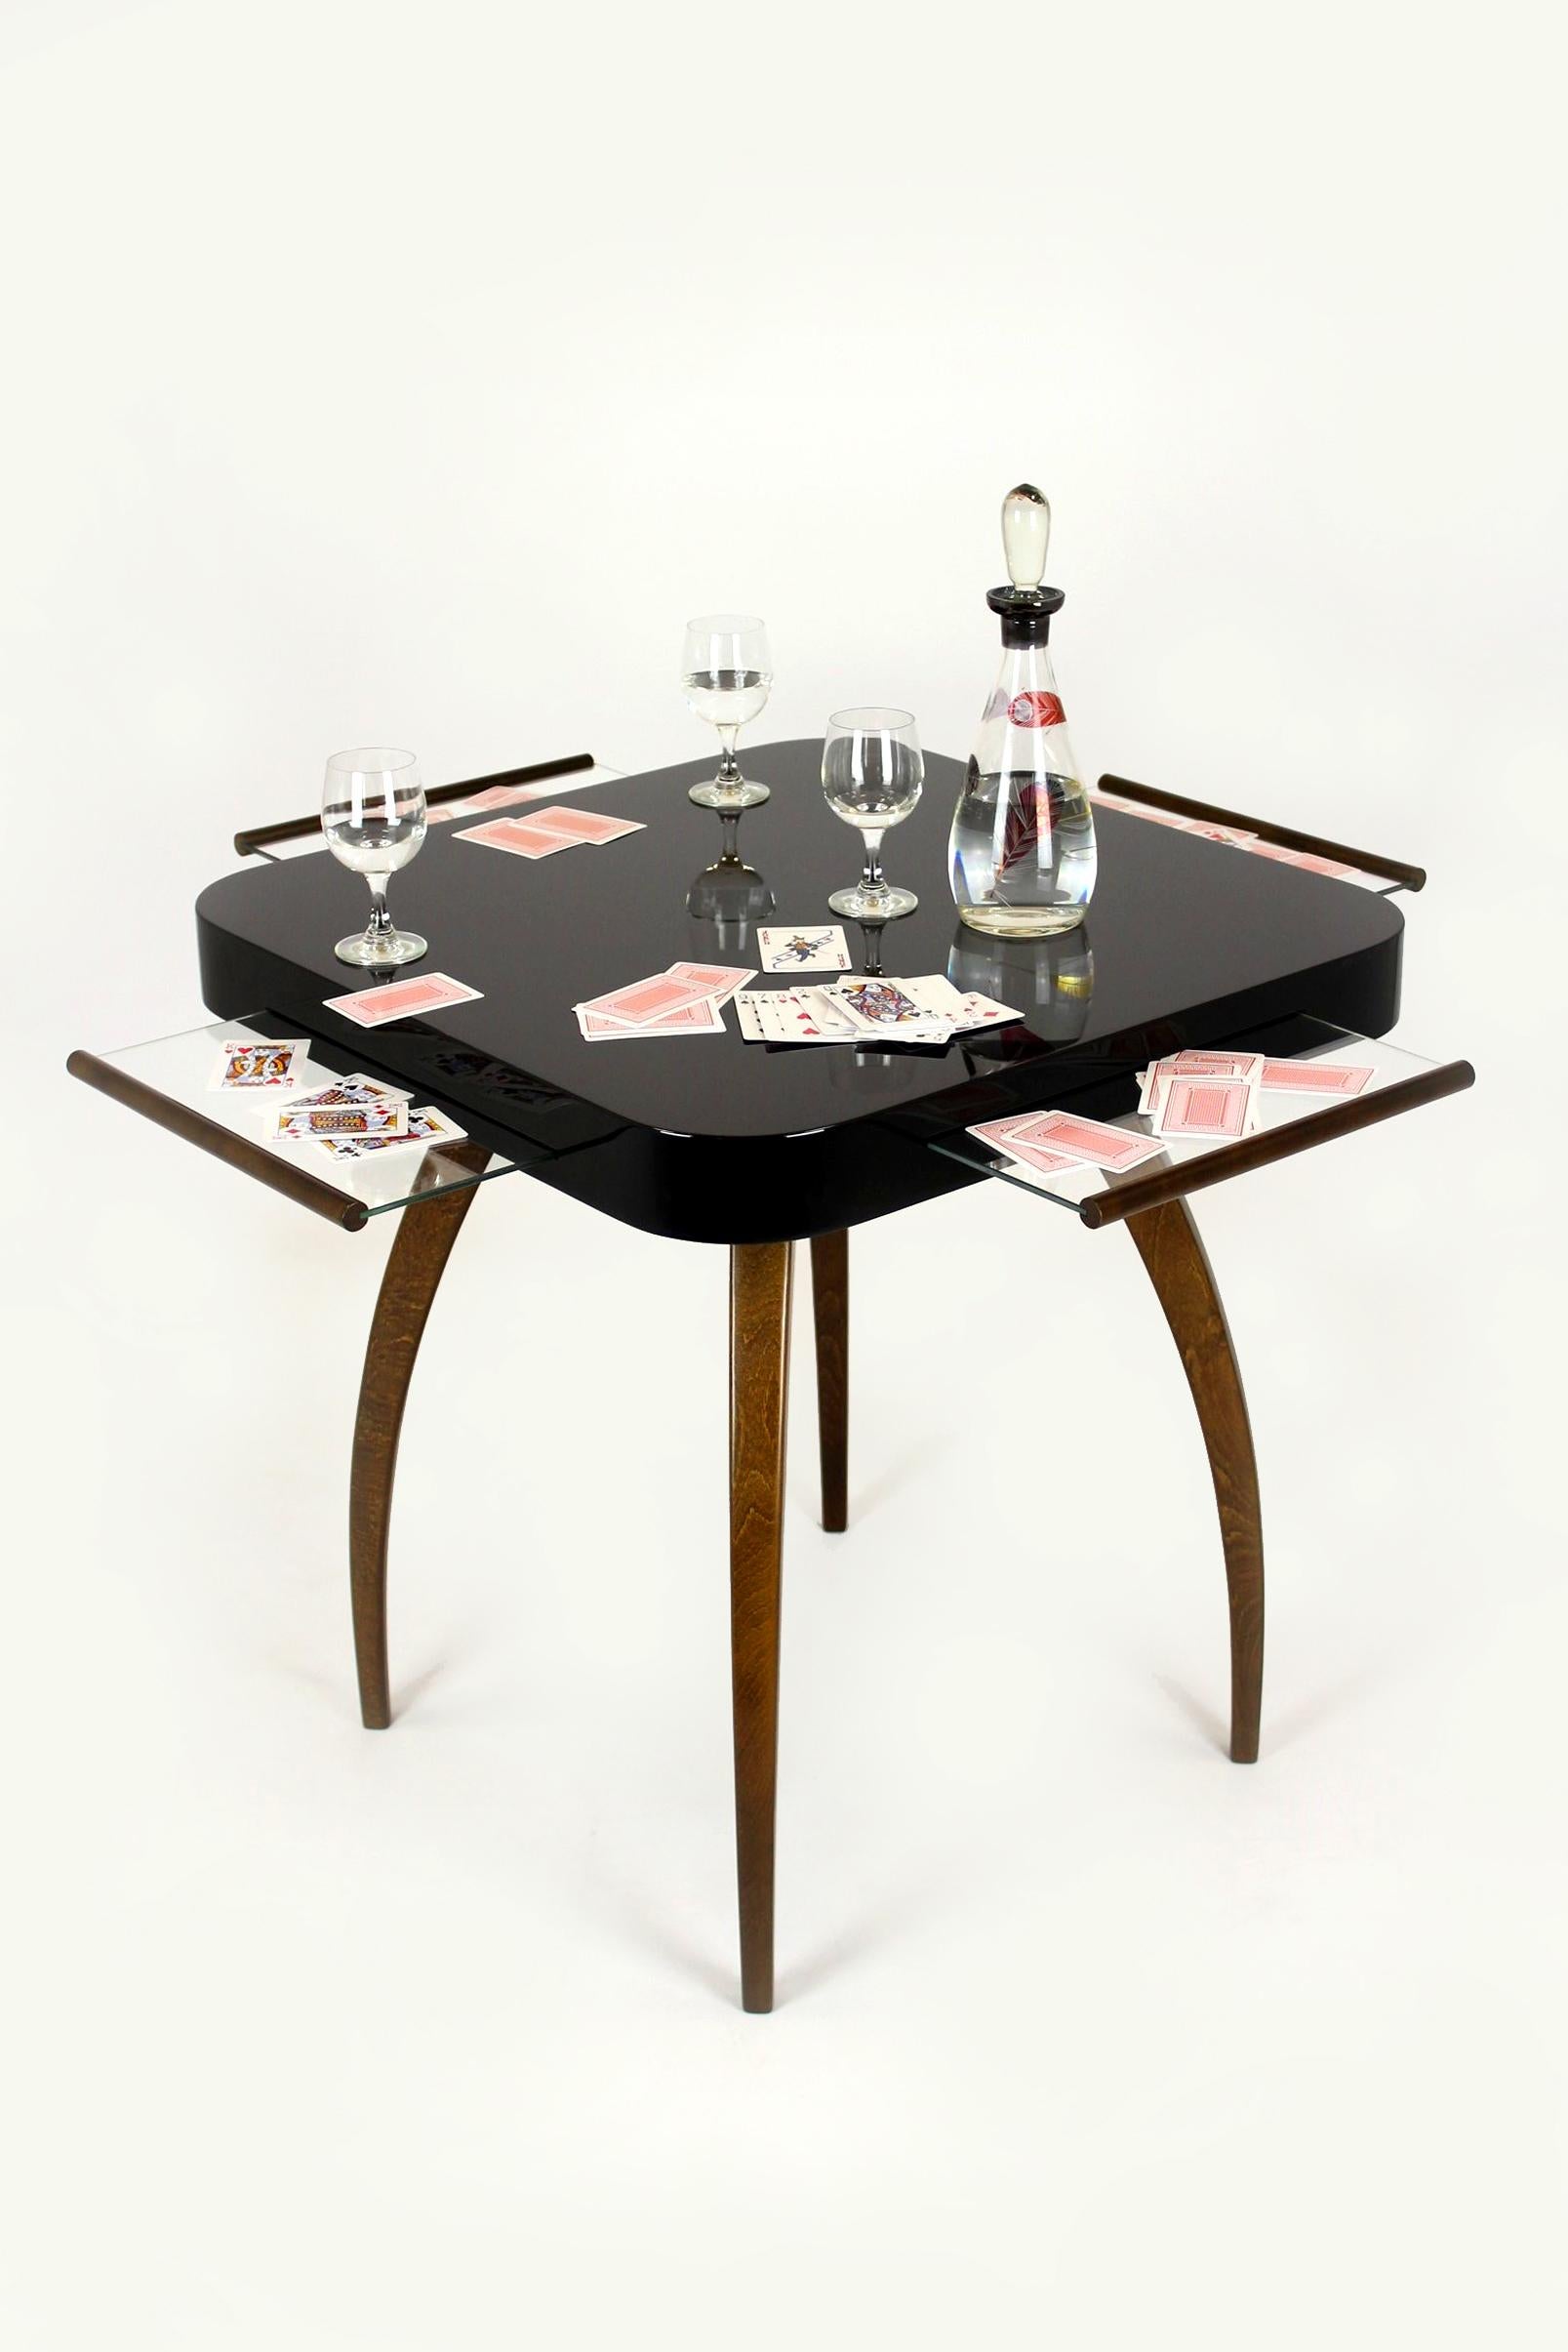 
This H-259 table designed by Jindrich Halabala is also known as 